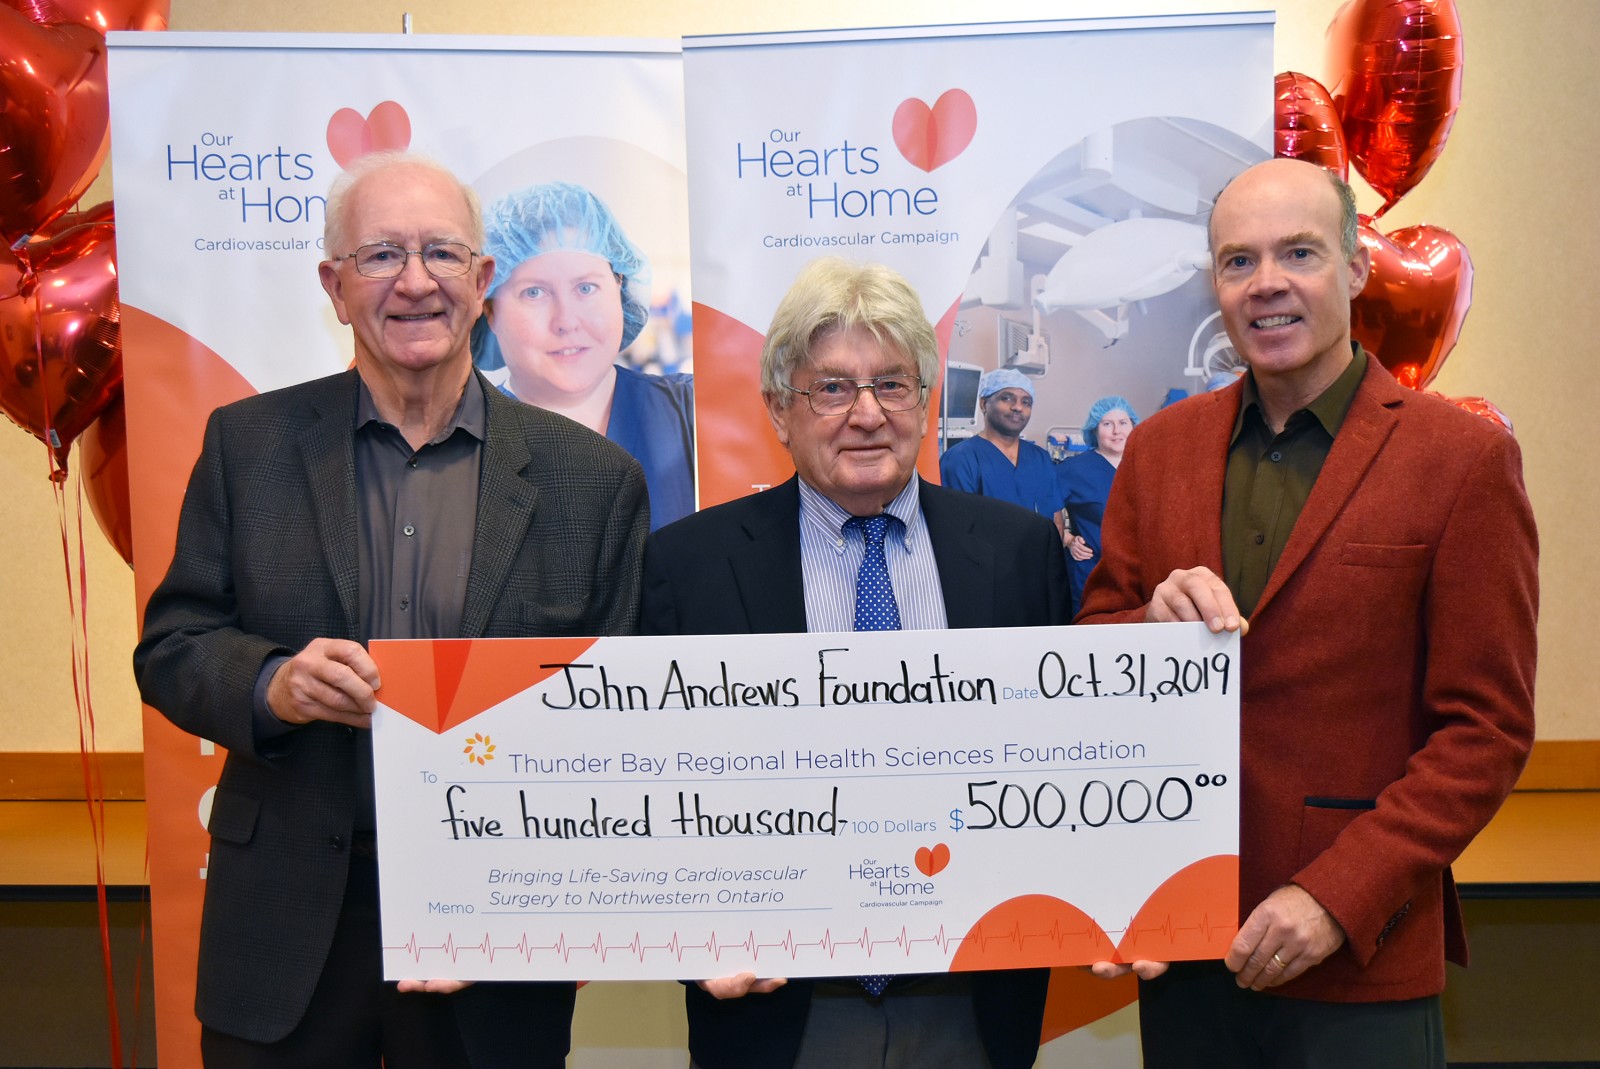 $500,000 Donation Announced by the John Andrews Foundation